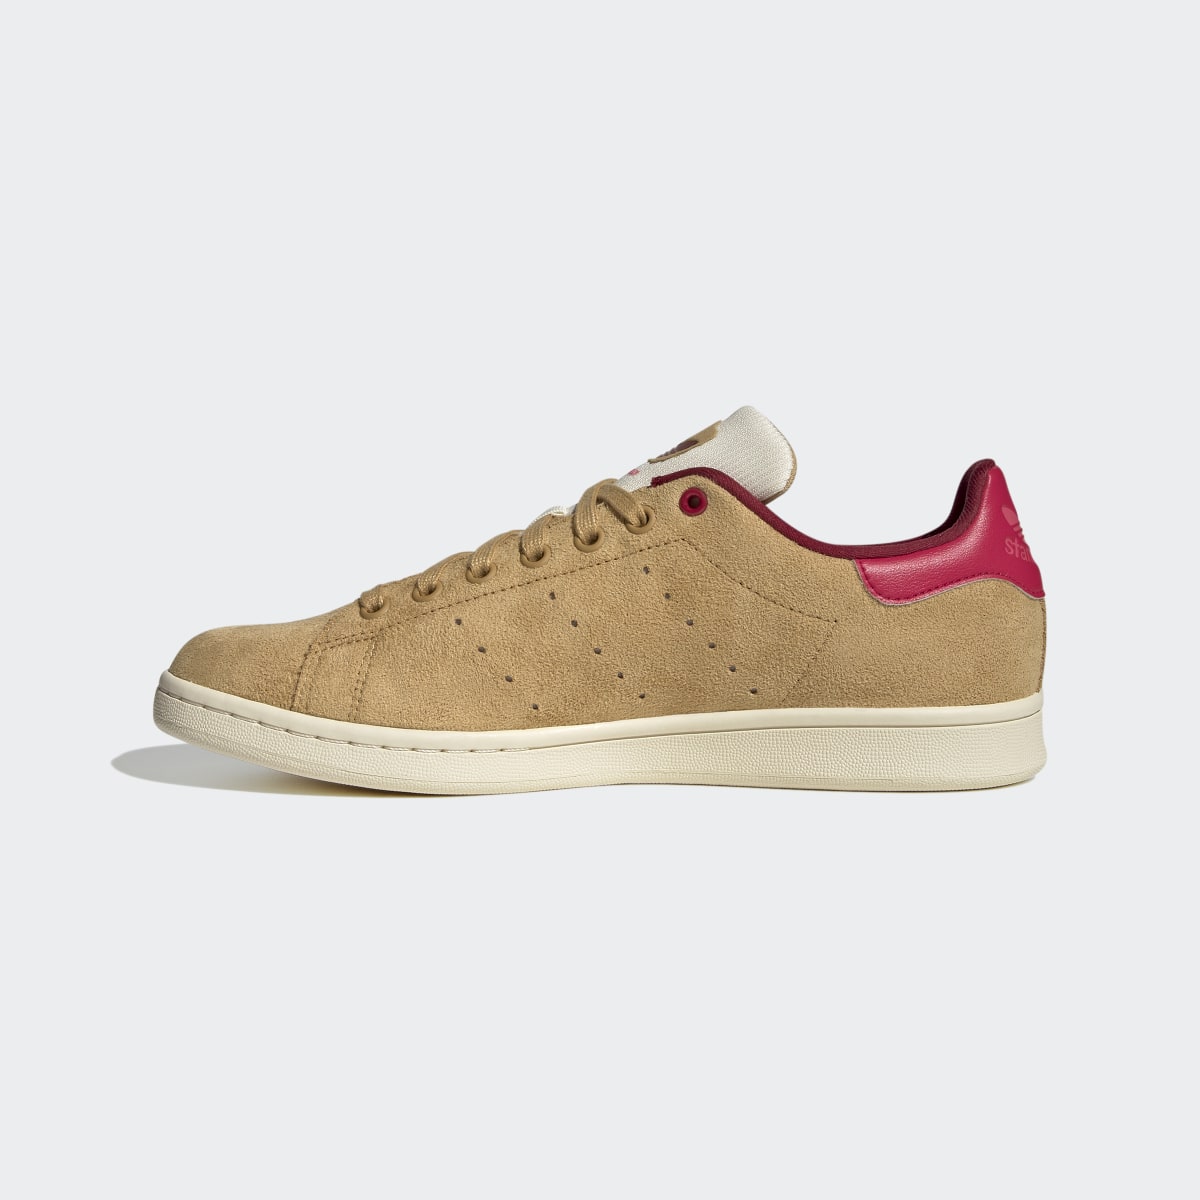 Adidas Stan Smith Shoes. 7